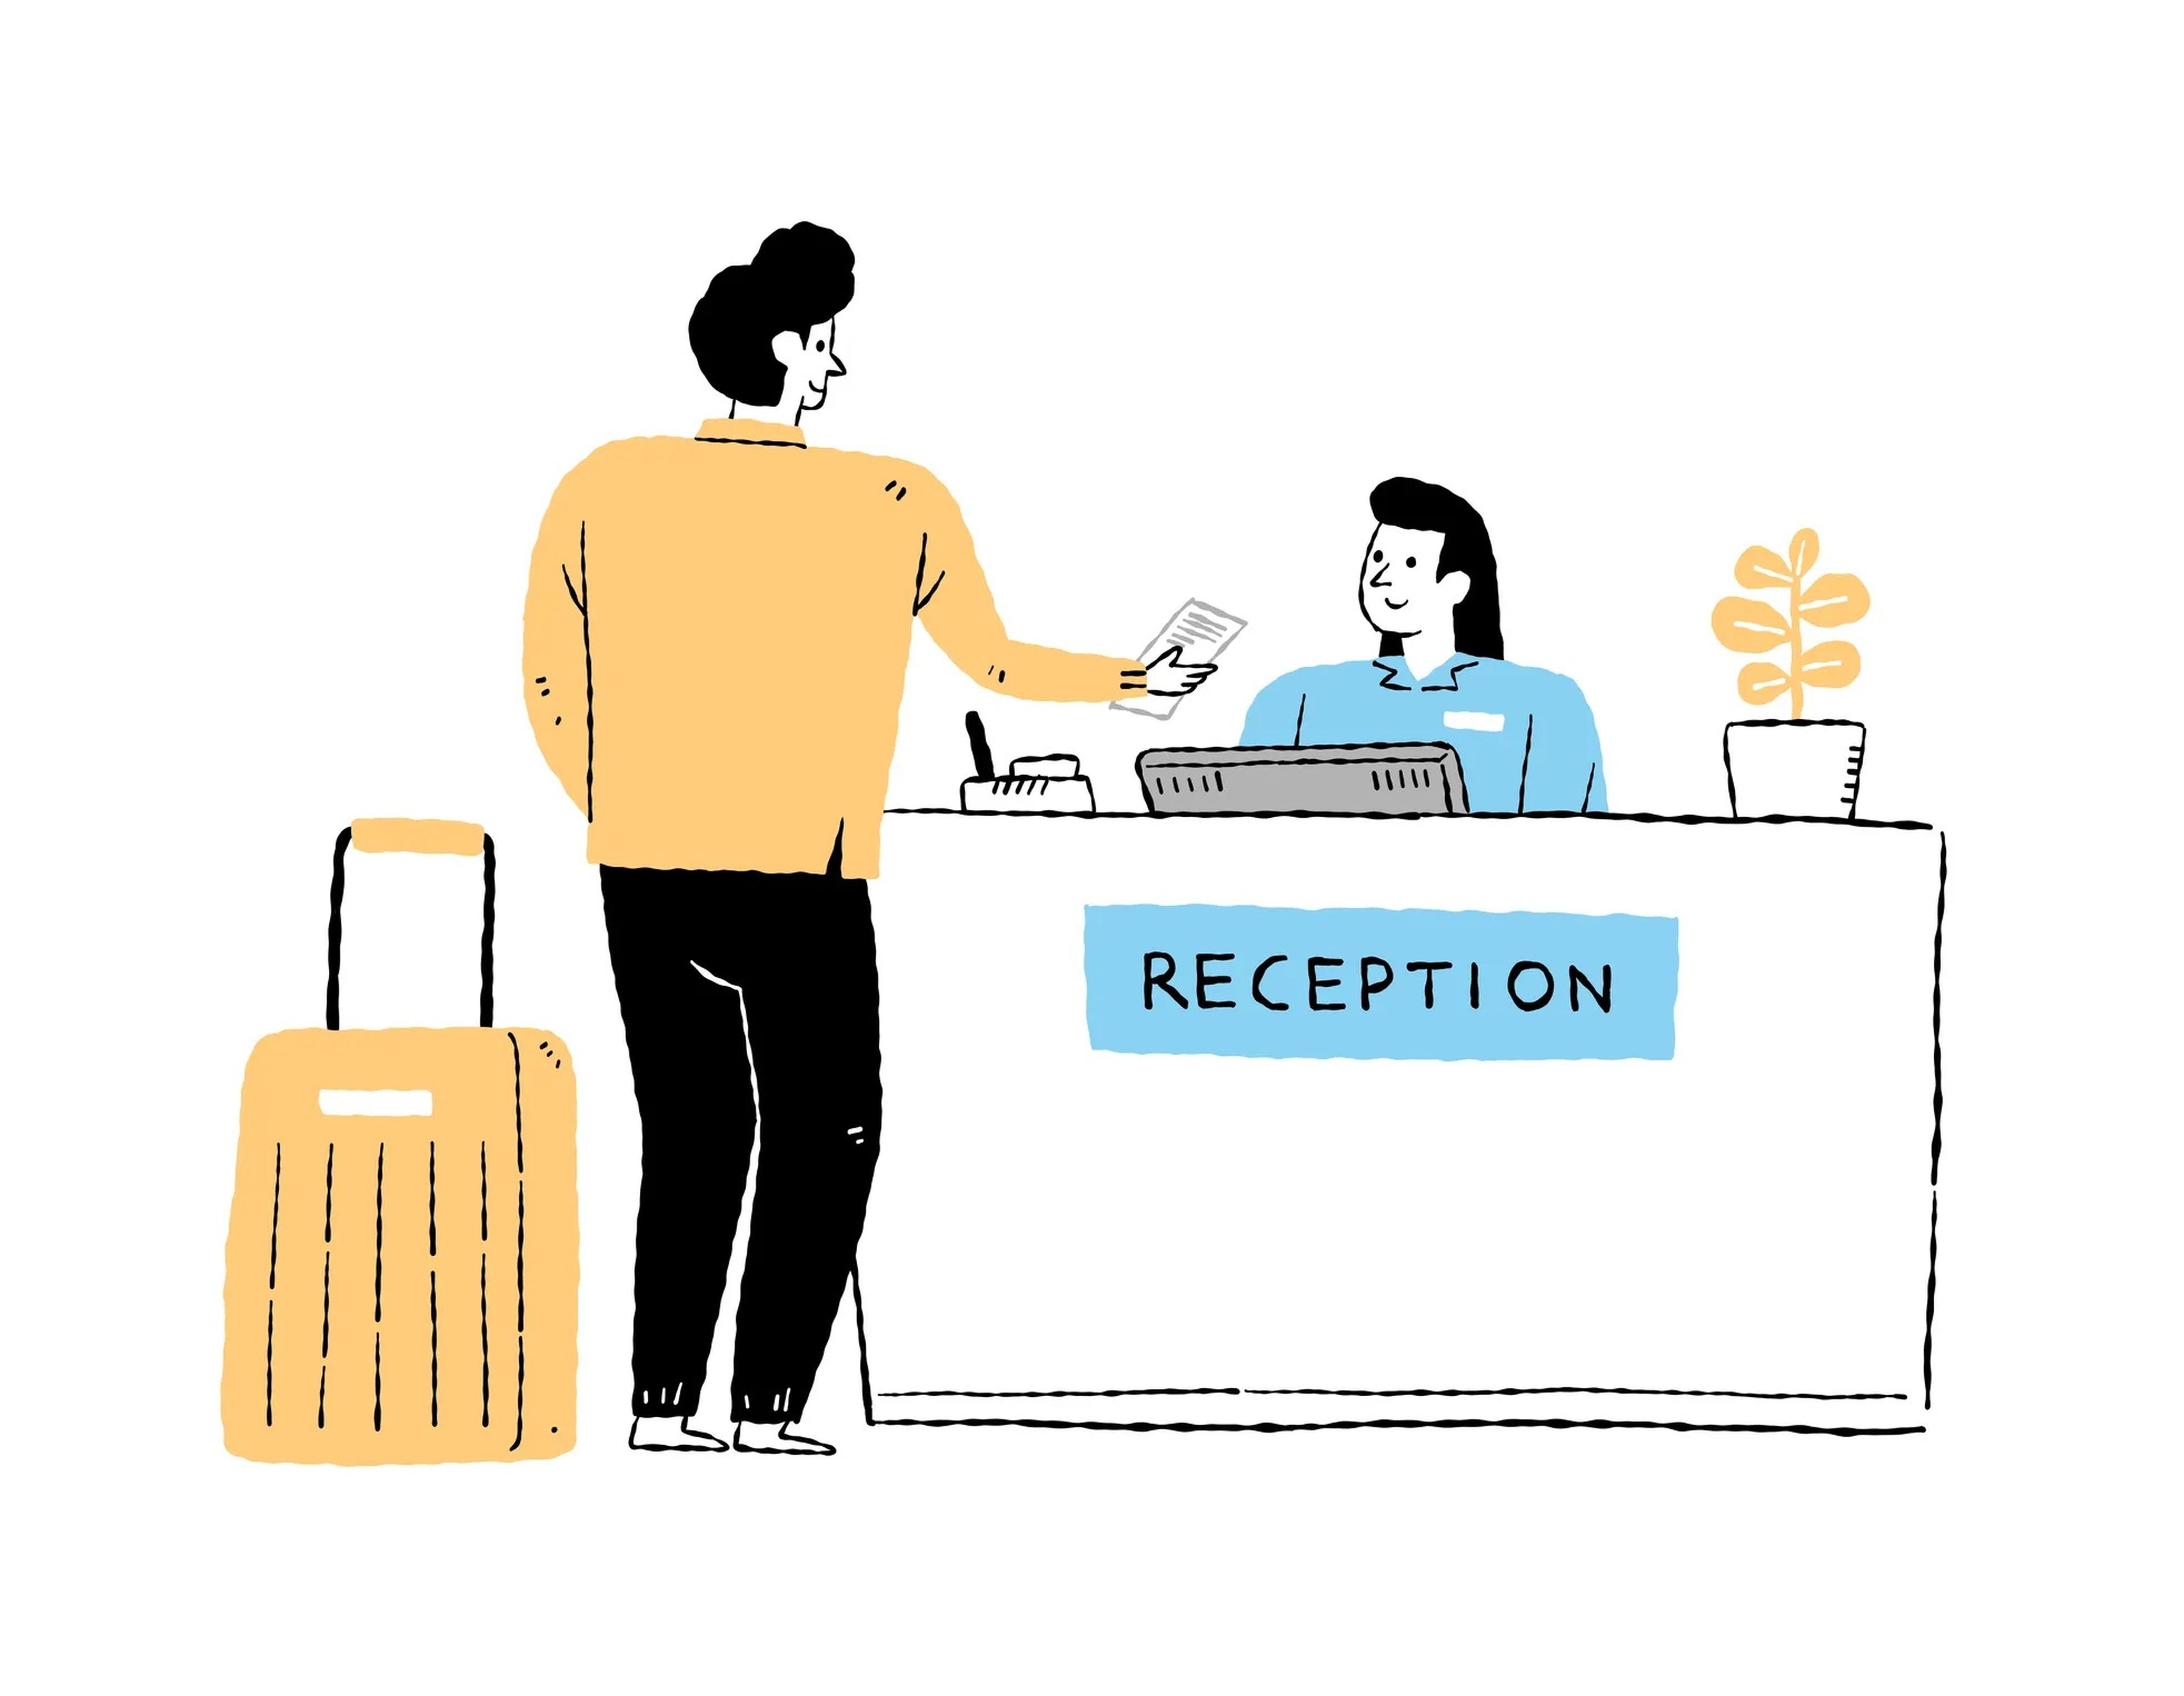 Cartoon of a man at a hotel check-in desk